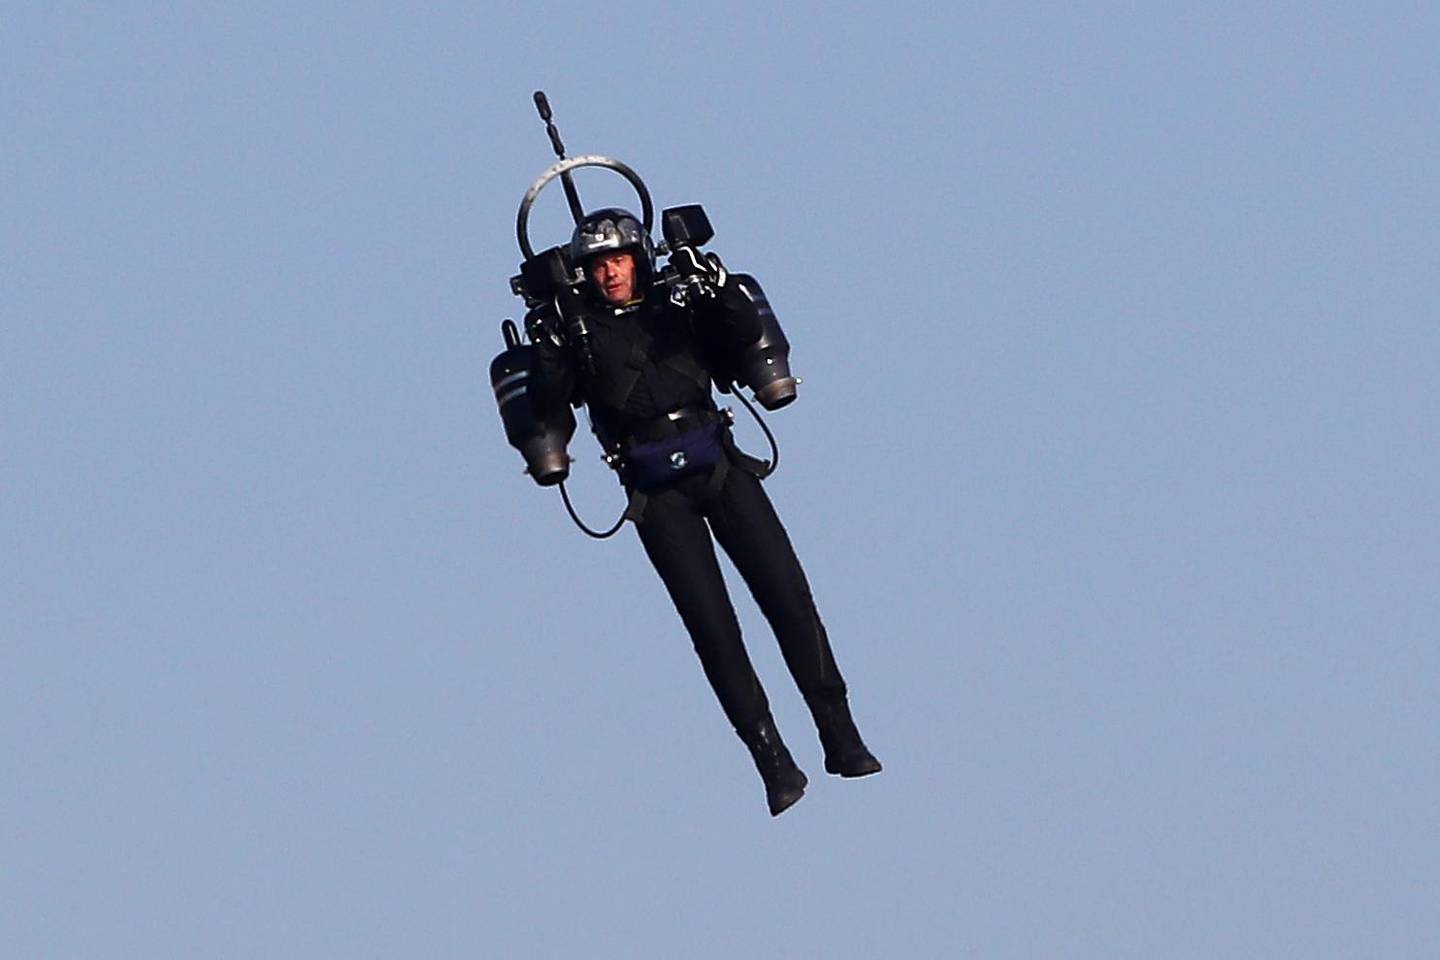 (FILES) In this file photo taken on April 21, 2018 "Jetpack Man" flies during the 2018 Red Bull Air Race World Championships in Cannes. - The Federal Bureau of Investigation said September 1, 2020 it had launched a probe after pilots landing at Los Angeles airport over the weekend reported seeing a person in a jet pack flying right next to them. (Photo by VALERY HACHE / AFP)